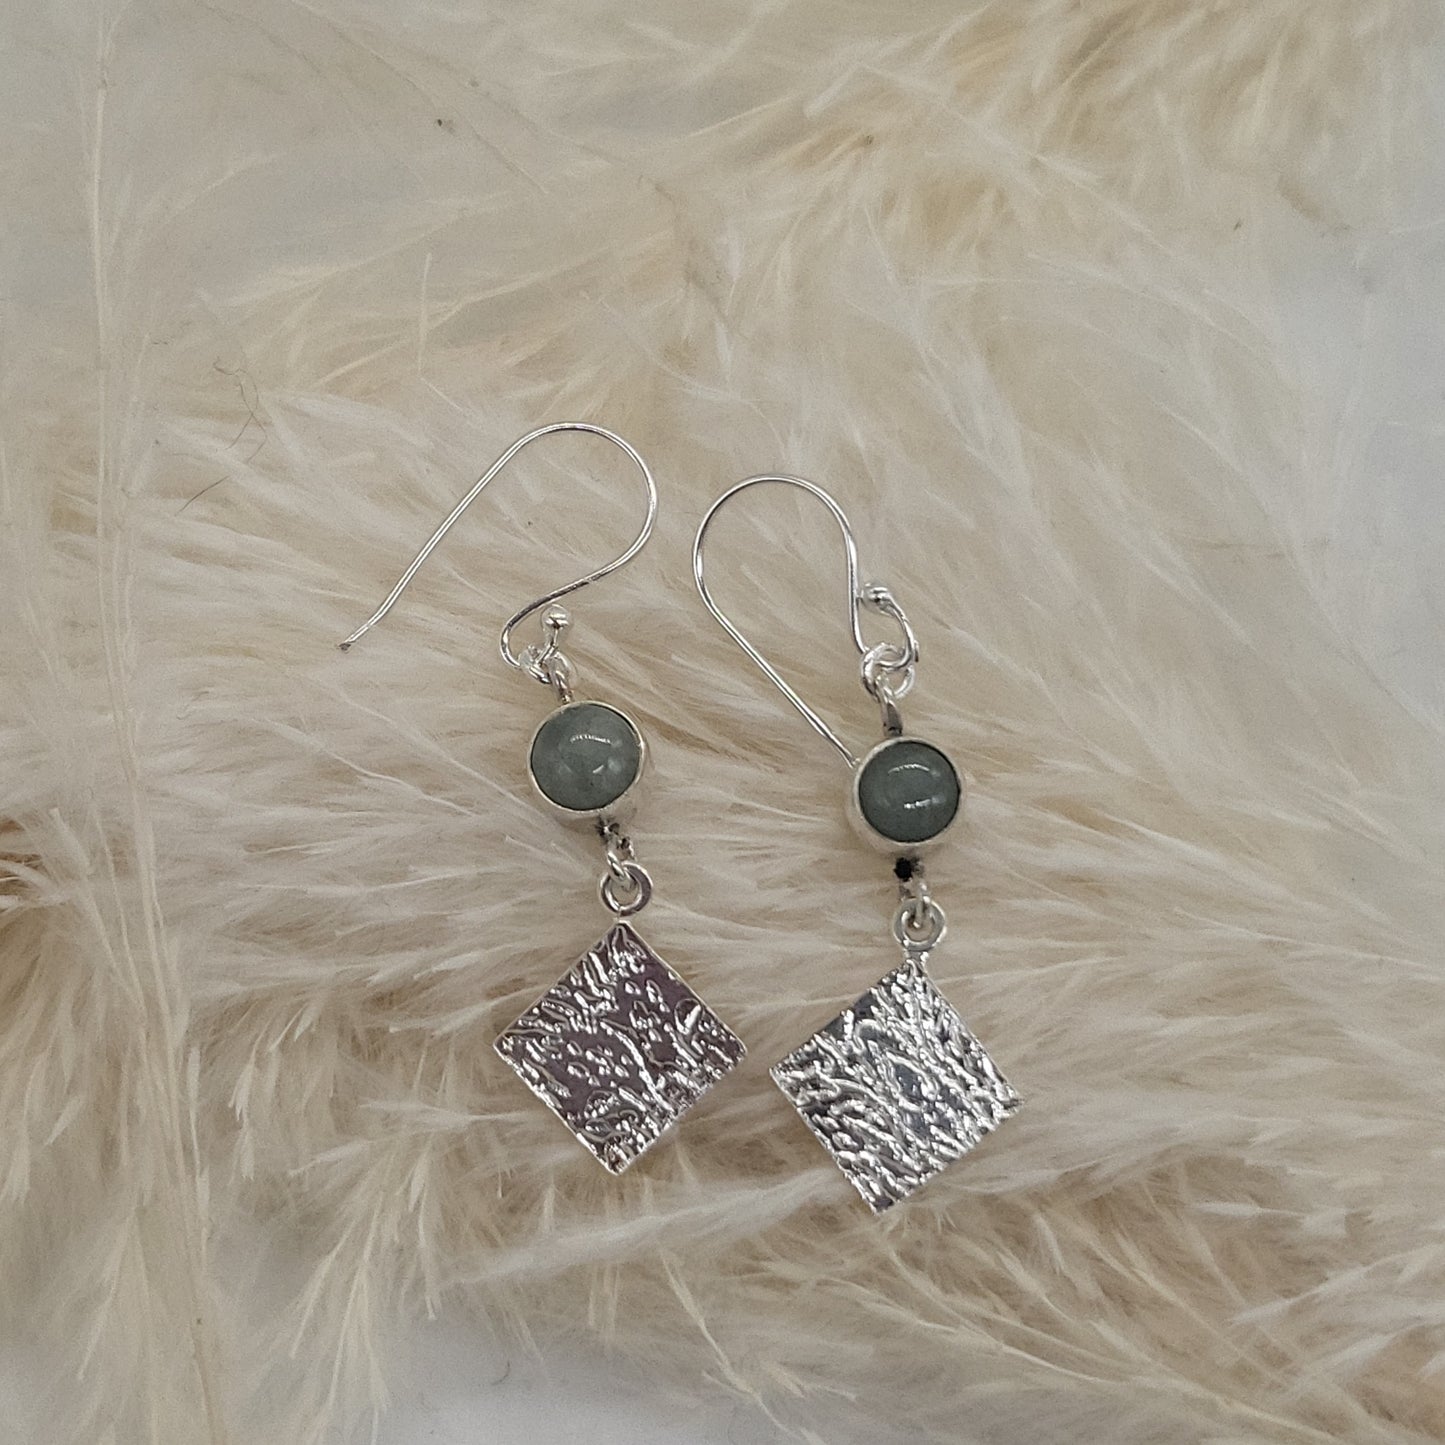 Aquamarine and textured Square Drop Earrings